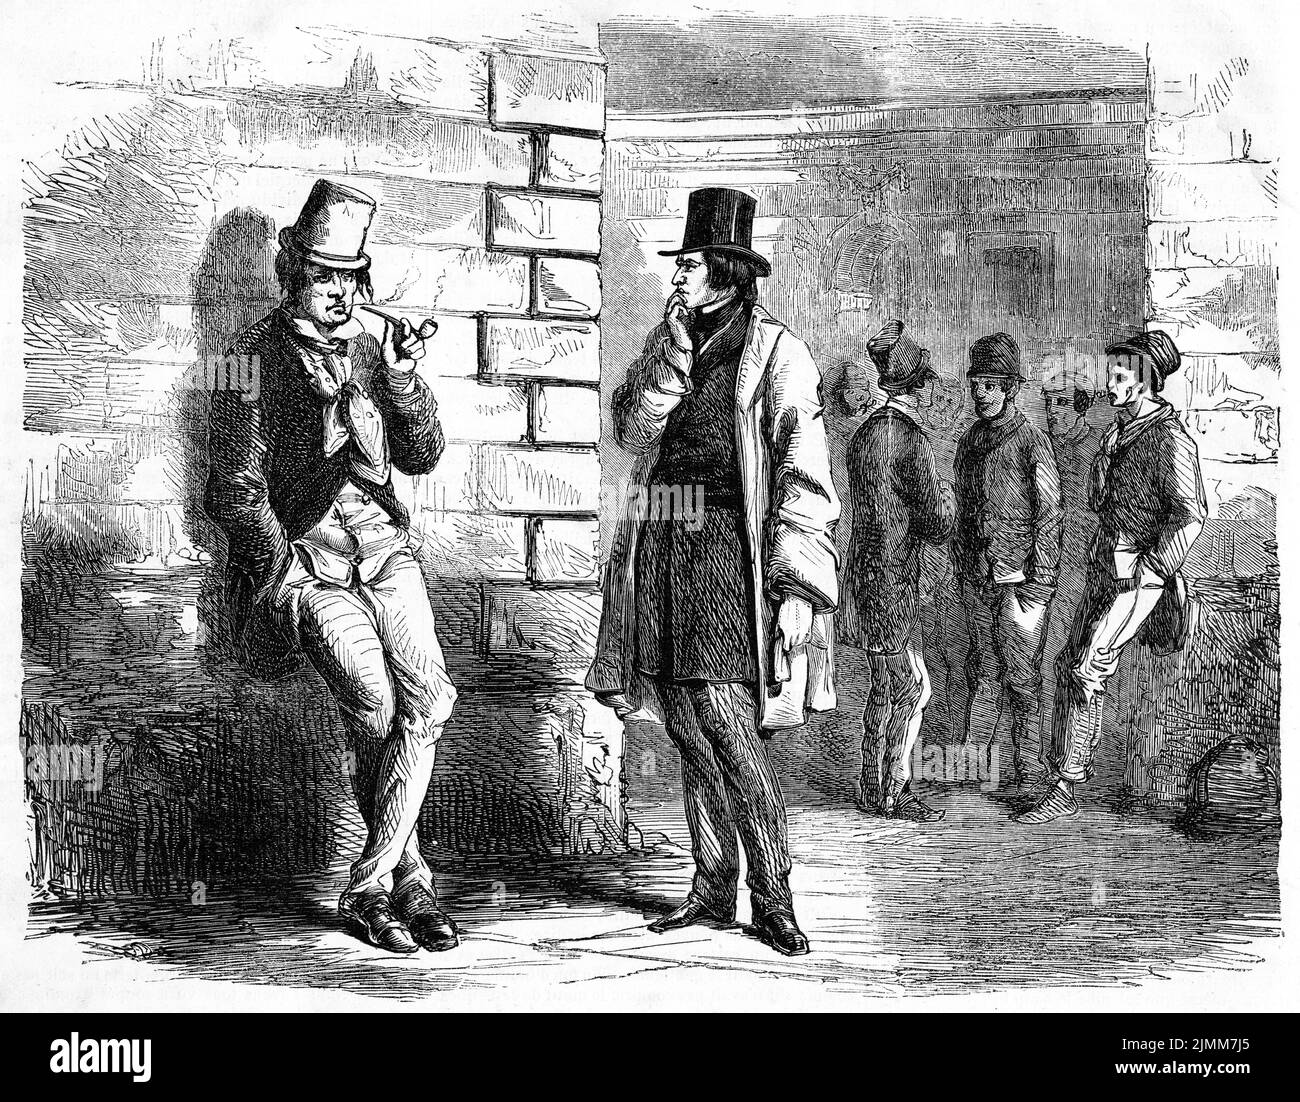 Illustration from the French magazine Journal Pour Tous (newspaper for all) in 1856, showing two men loitering on the city streets of Paris Stock Photo